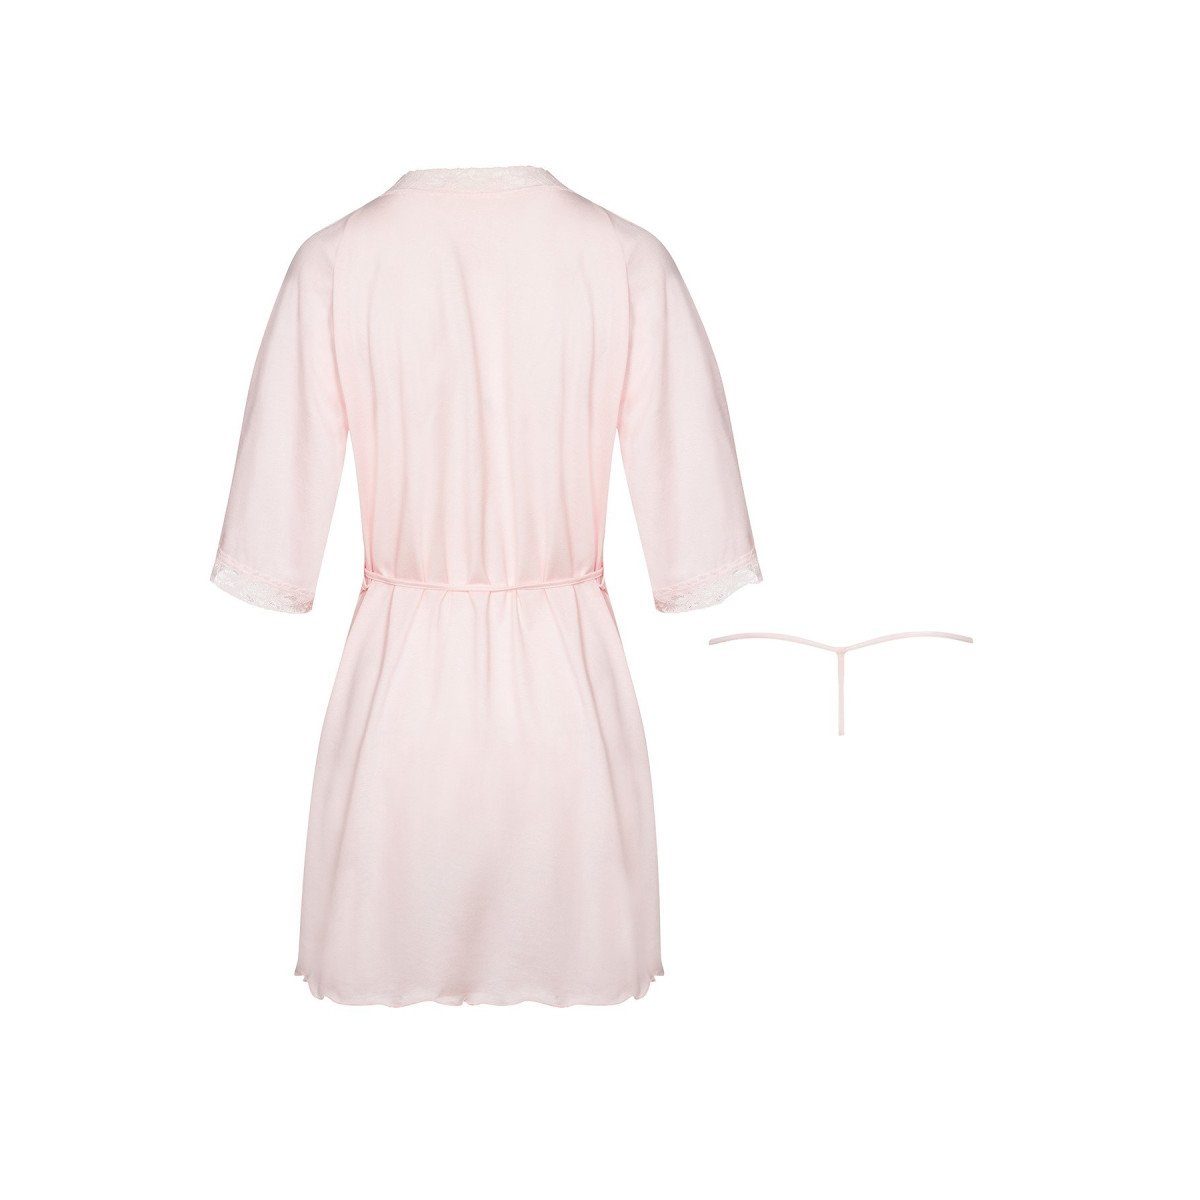 Gown Night Beauty - Dressing BN Fashion pink Marcy (L/XL,S/M) Nachthemd